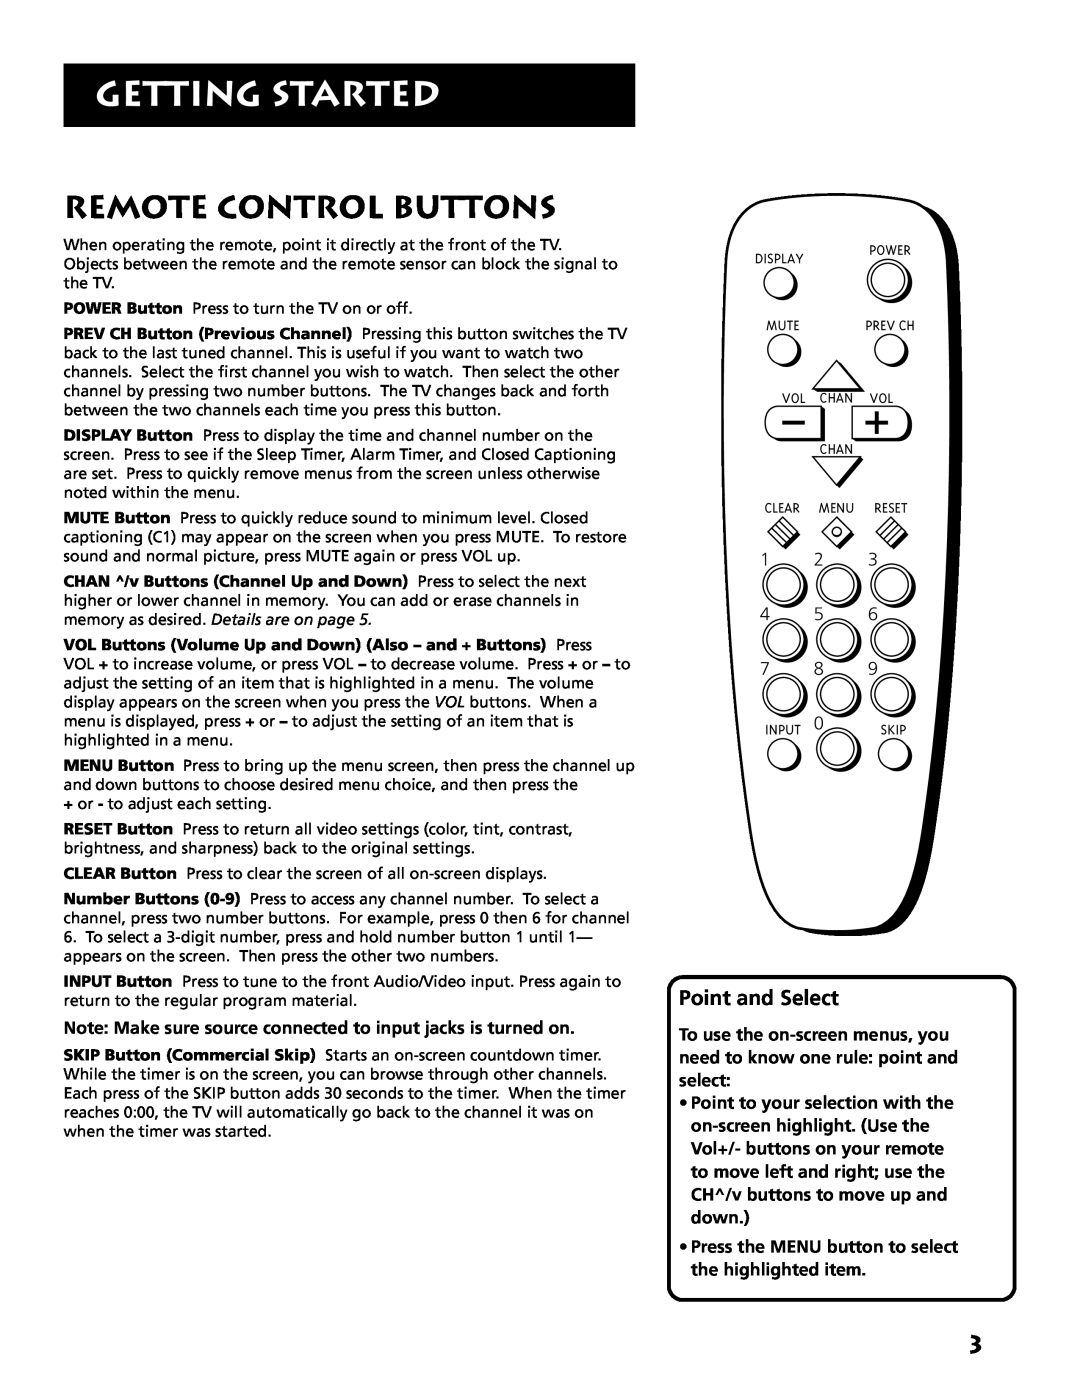 RCA E13318 manual Remote Control Buttons, Point and Select, Note Make sure source connected to input jacks is turned on 